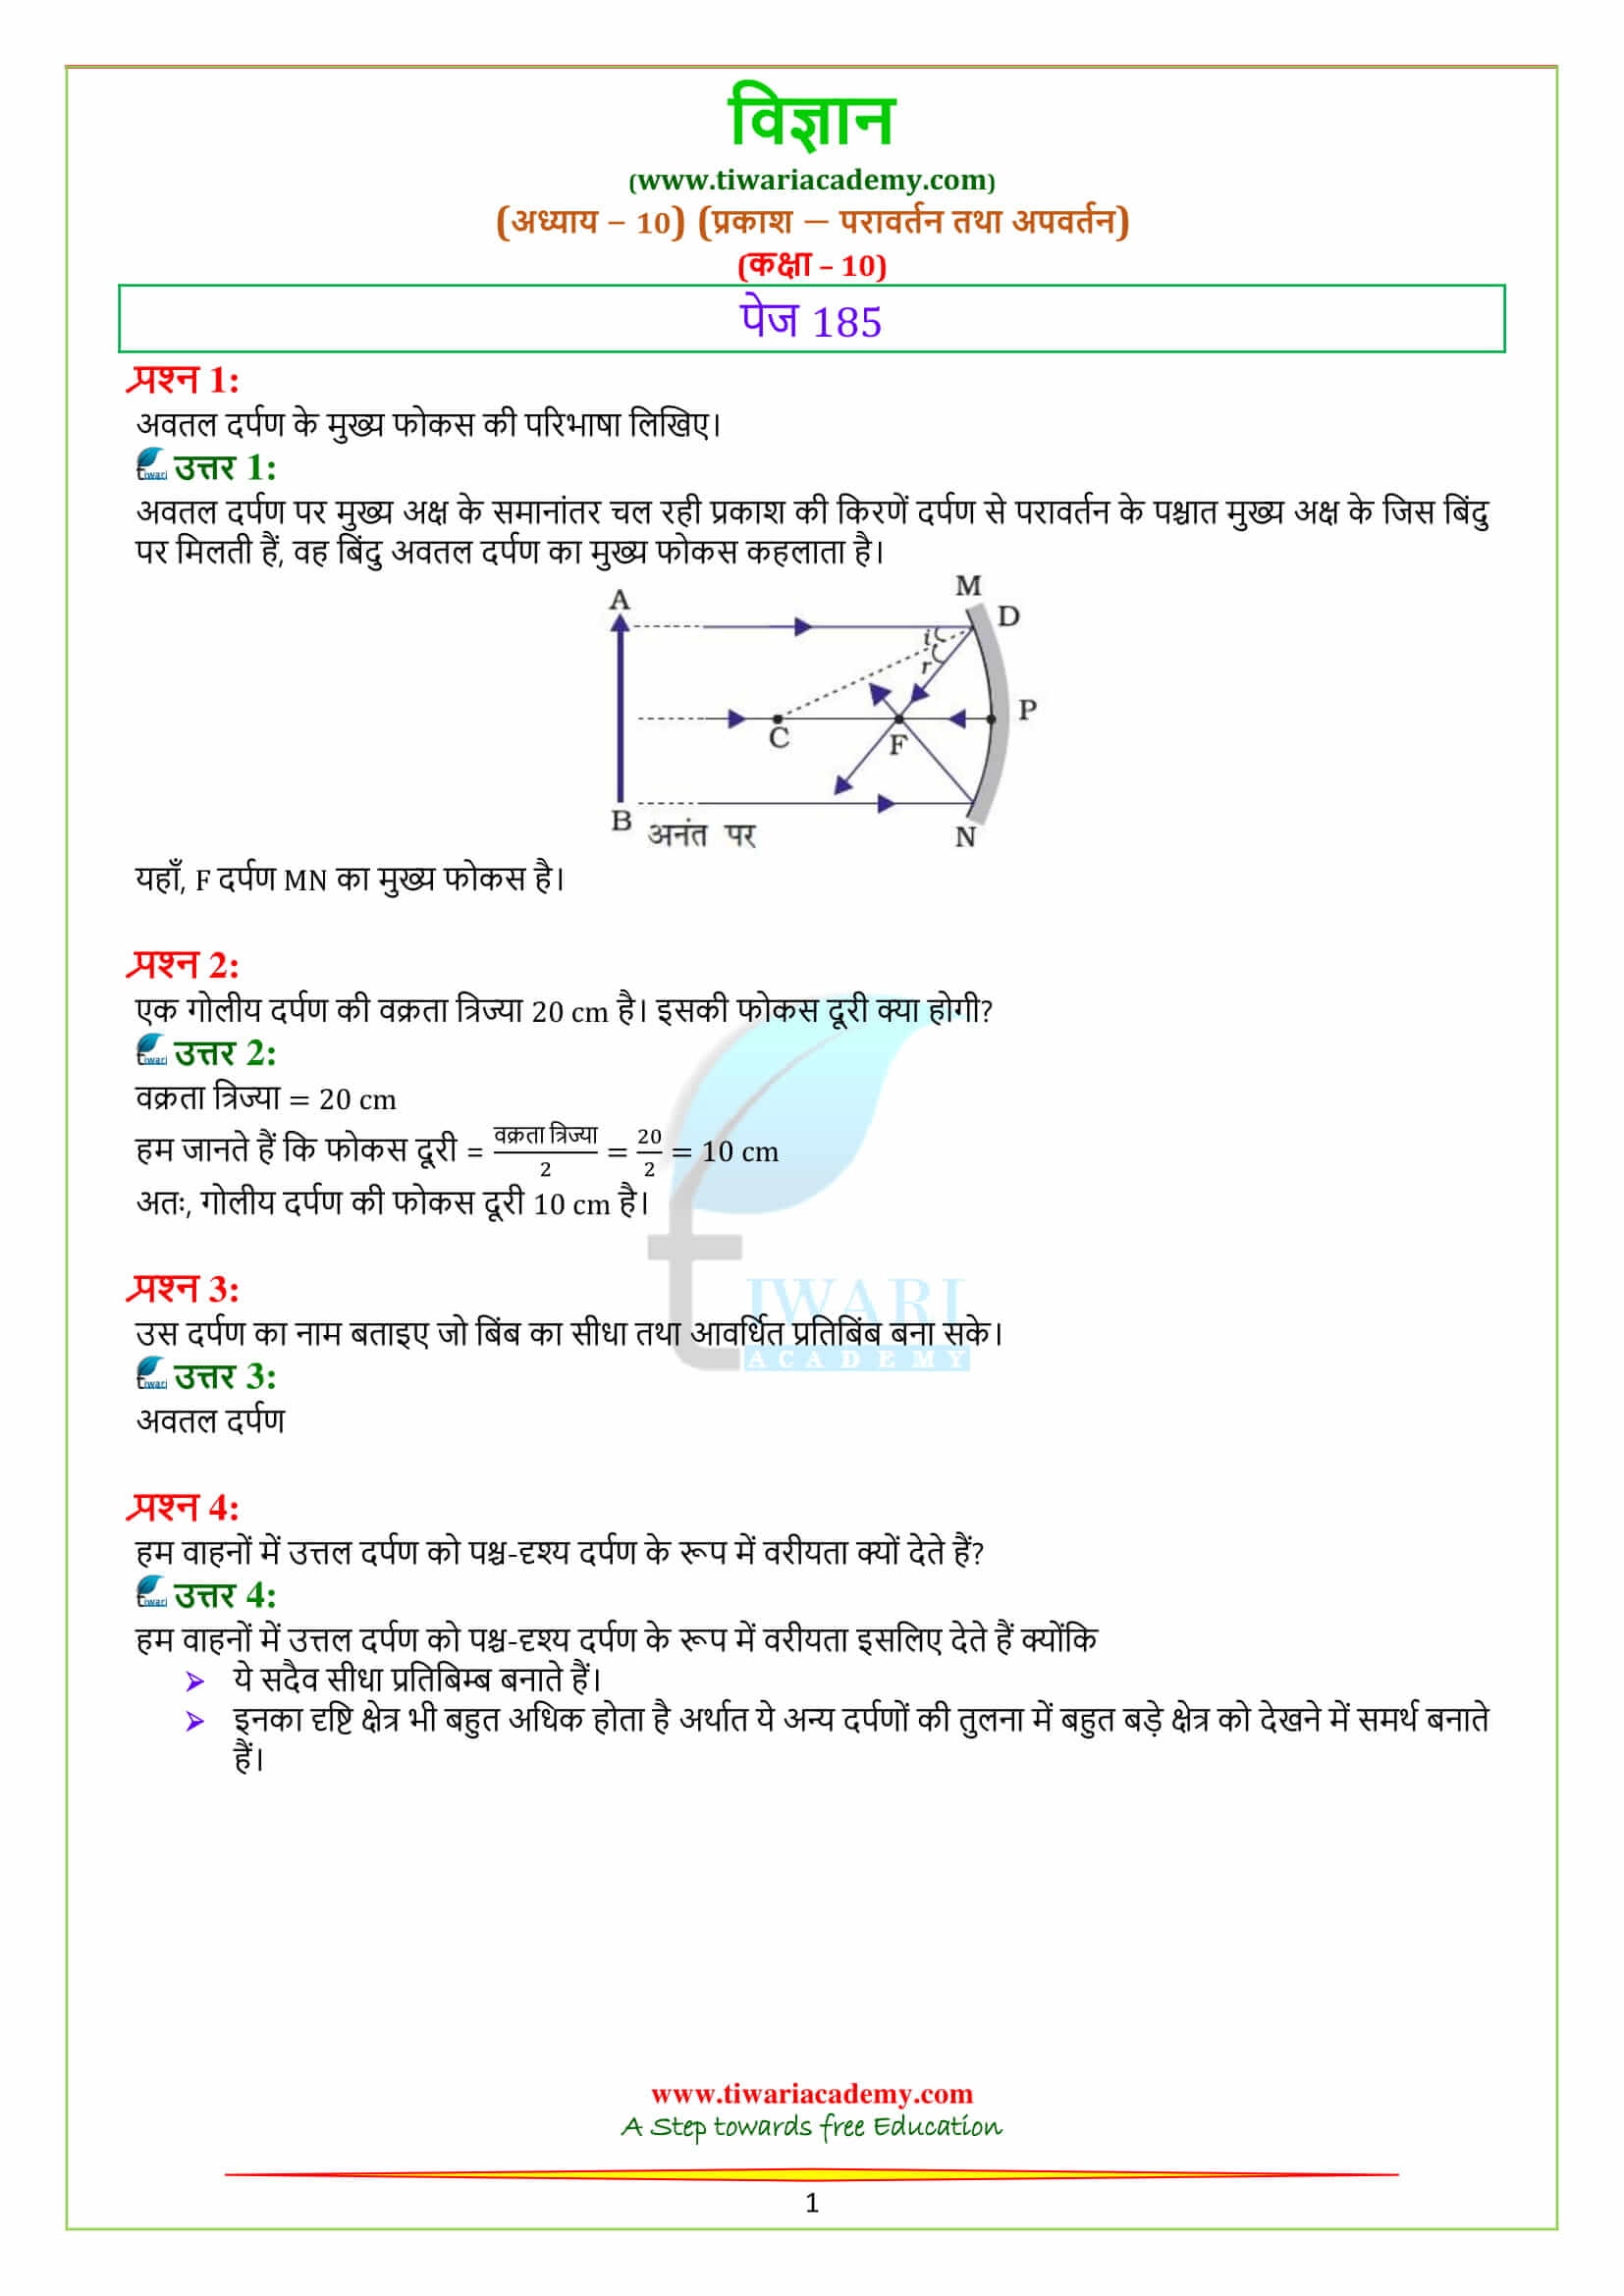 NCERT Solutions for Class 10 Science Chapter 10 Light – Reflection and Refraction Intext questions on page 185